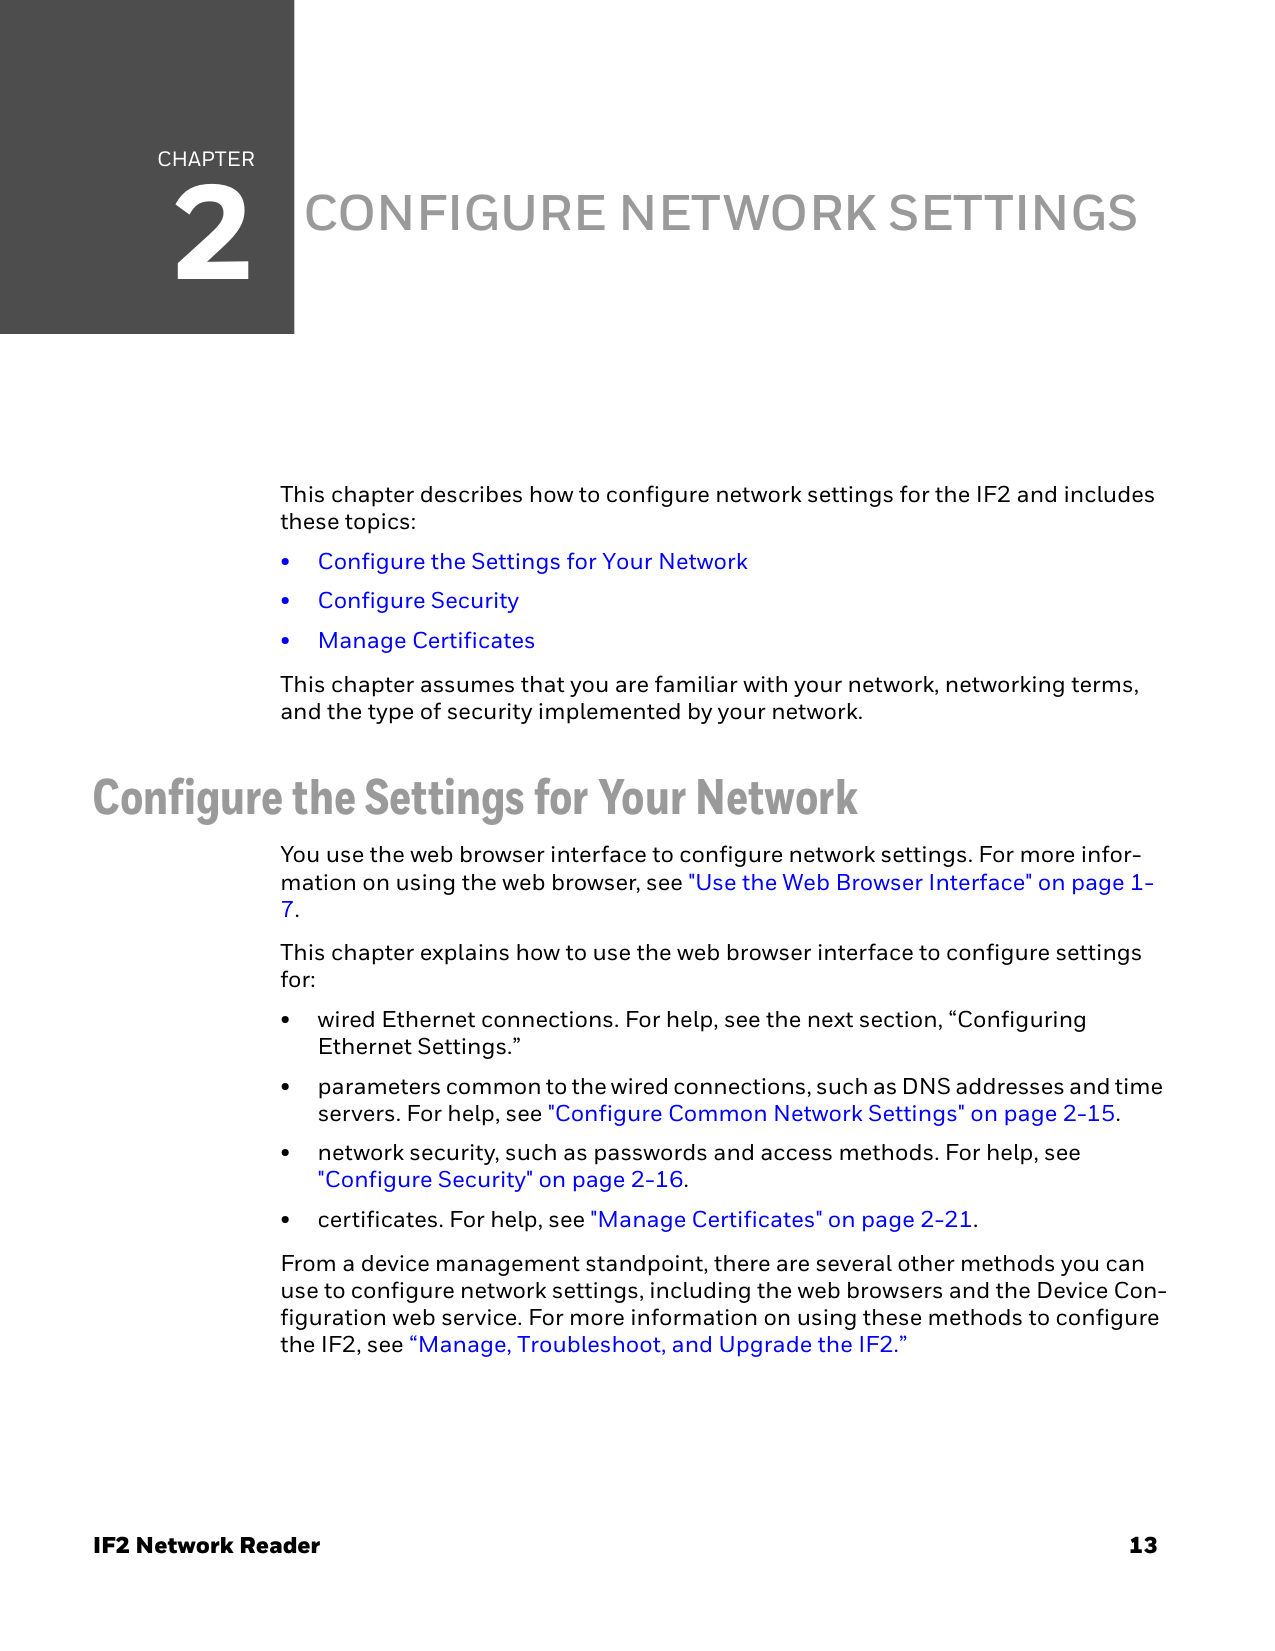 CHAPTER2IF2 Network Reader 13CONFIGURE NETWORK SETTINGSThis chapter describes how to configure network settings for the IF2 and includes these topics:• Configure the Settings for Your Network• Configure Security• Manage CertificatesThis chapter assumes that you are familiar with your network, networking terms, and the type of security implemented by your network.Configure the Settings for Your NetworkYou use the web browser interface to configure network settings. For more infor-mation on using the web browser, see &quot;Use the Web Browser Interface&quot; on page 1-7.This chapter explains how to use the web browser interface to configure settings for:• wired Ethernet connections. For help, see the next section, “Configuring Ethernet Settings.”• parameters common to the wired connections, such as DNS addresses and time servers. For help, see &quot;Configure Common Network Settings&quot; on page 2-15.• network security, such as passwords and access methods. For help, see &quot;Configure Security&quot; on page 2-16.• certificates. For help, see &quot;Manage Certificates&quot; on page 2-21.From a device management standpoint, there are several other methods you can use to configure network settings, including the web browsers and the Device Con-figuration web service. For more information on using these methods to configure the IF2, see “Manage, Troubleshoot, and Upgrade the IF2.”